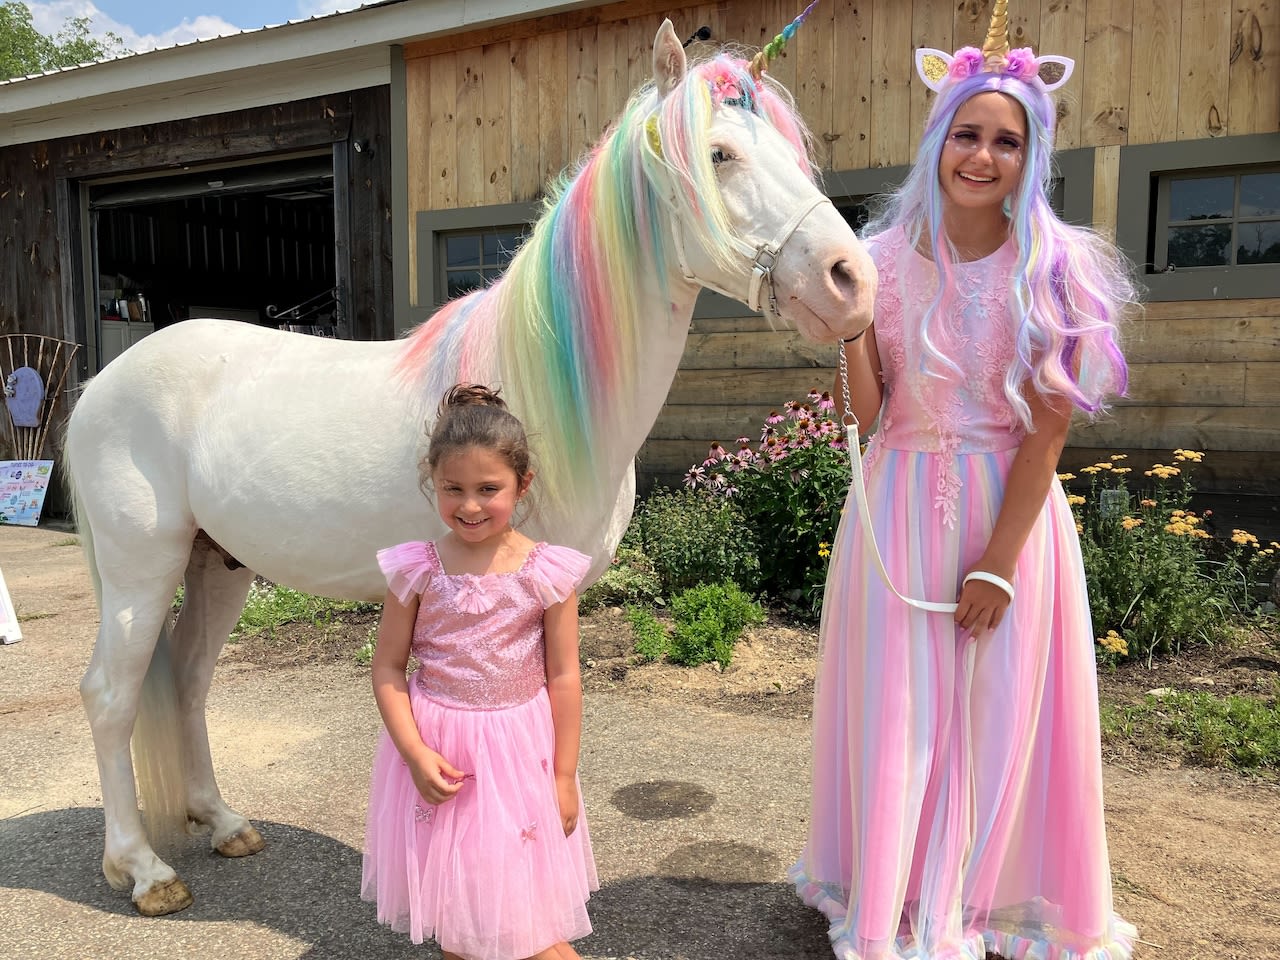 Magic in the air: Here’s where ‘unicorns’ were frolicking in Mass. this weekend